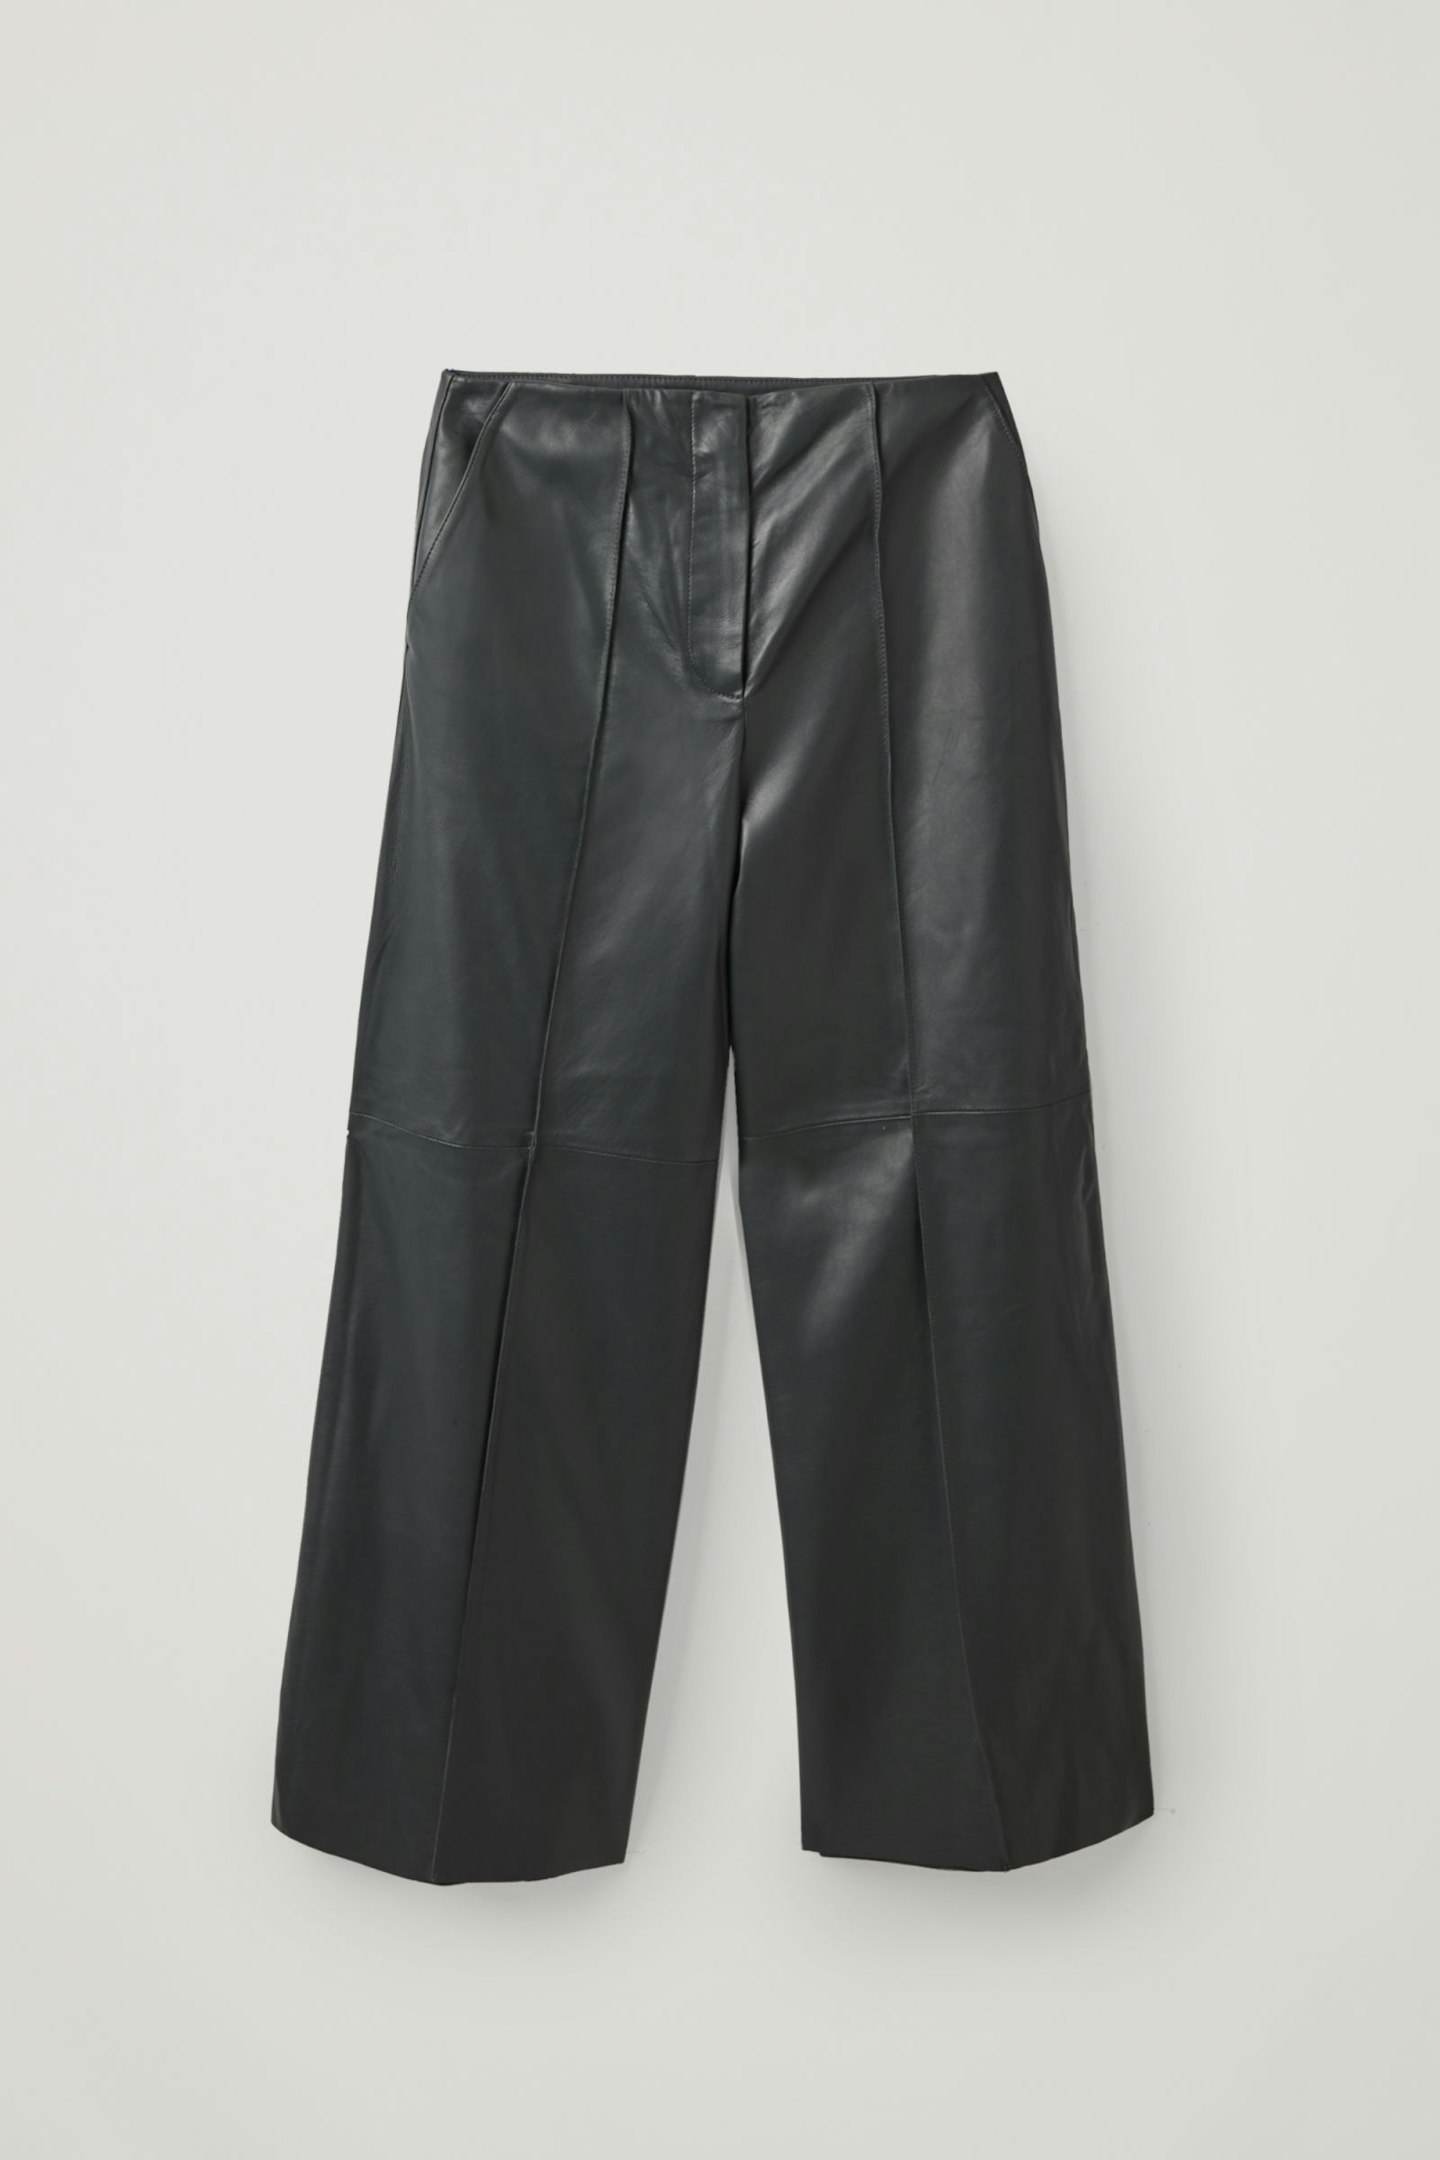 COS, Long Leather Trousers, £350